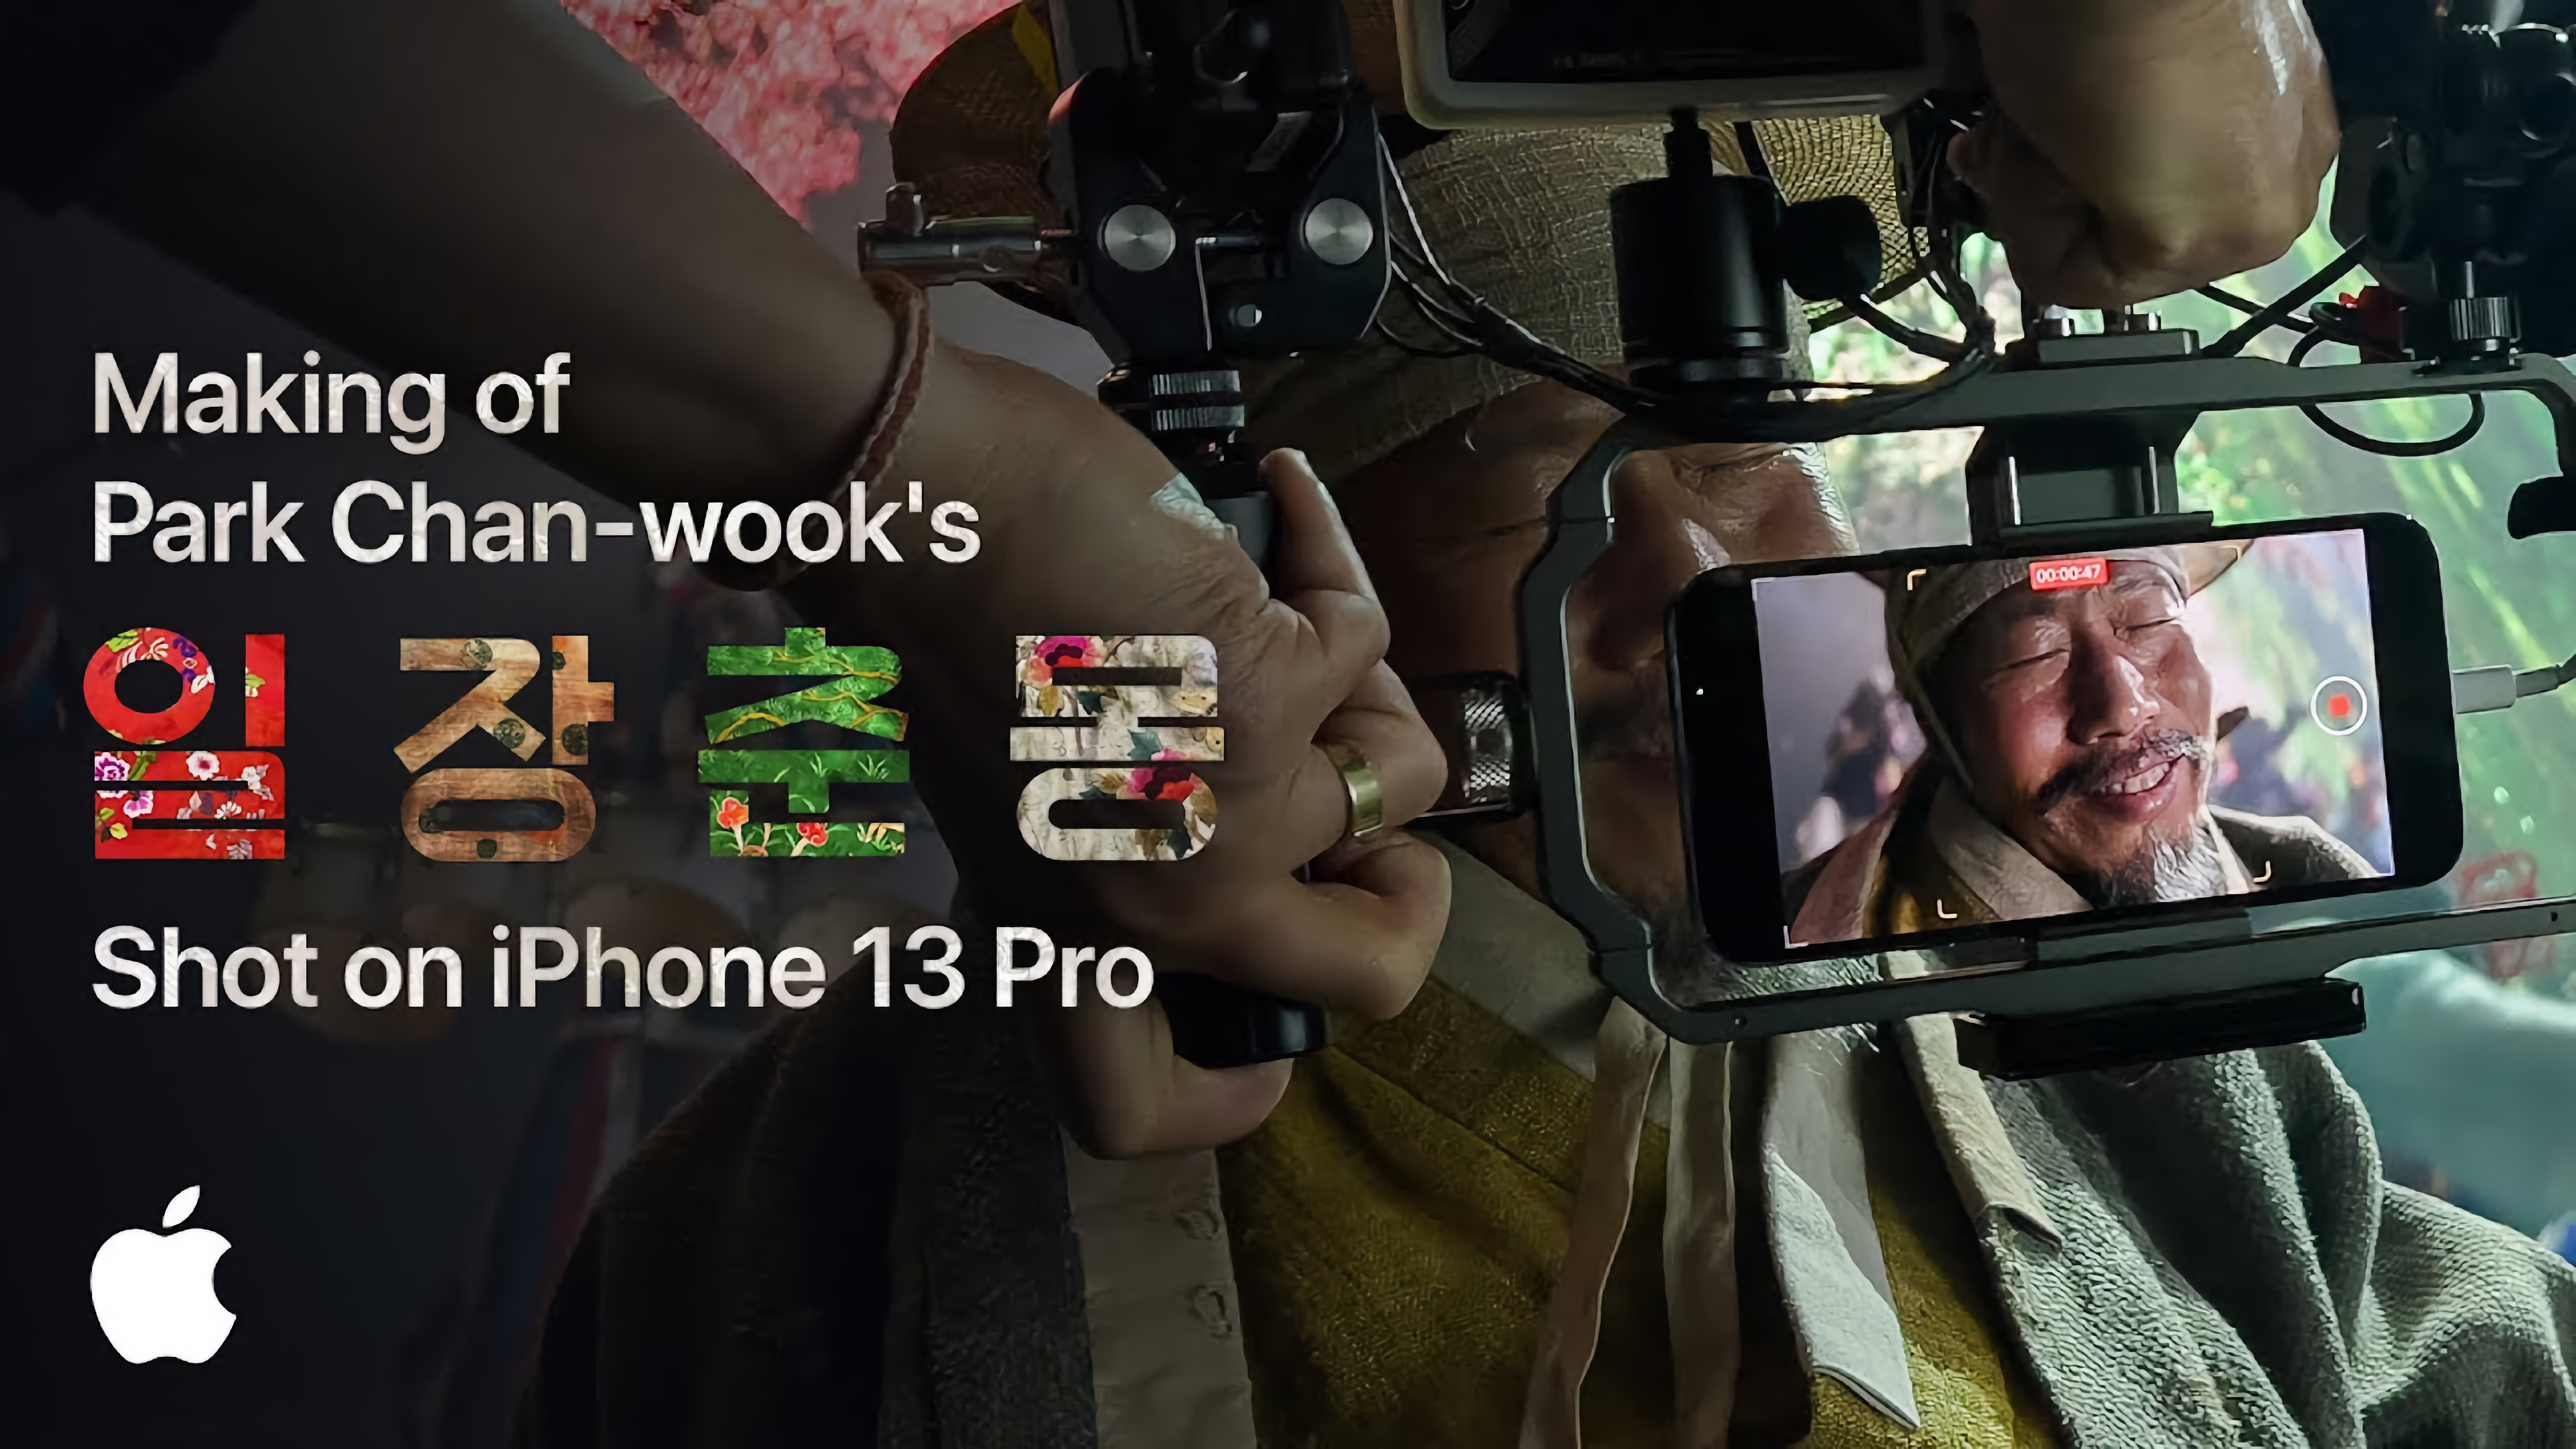 Apple shares film shot on iPhone 13 Pro by Park Chan-wook - 9to5Mac